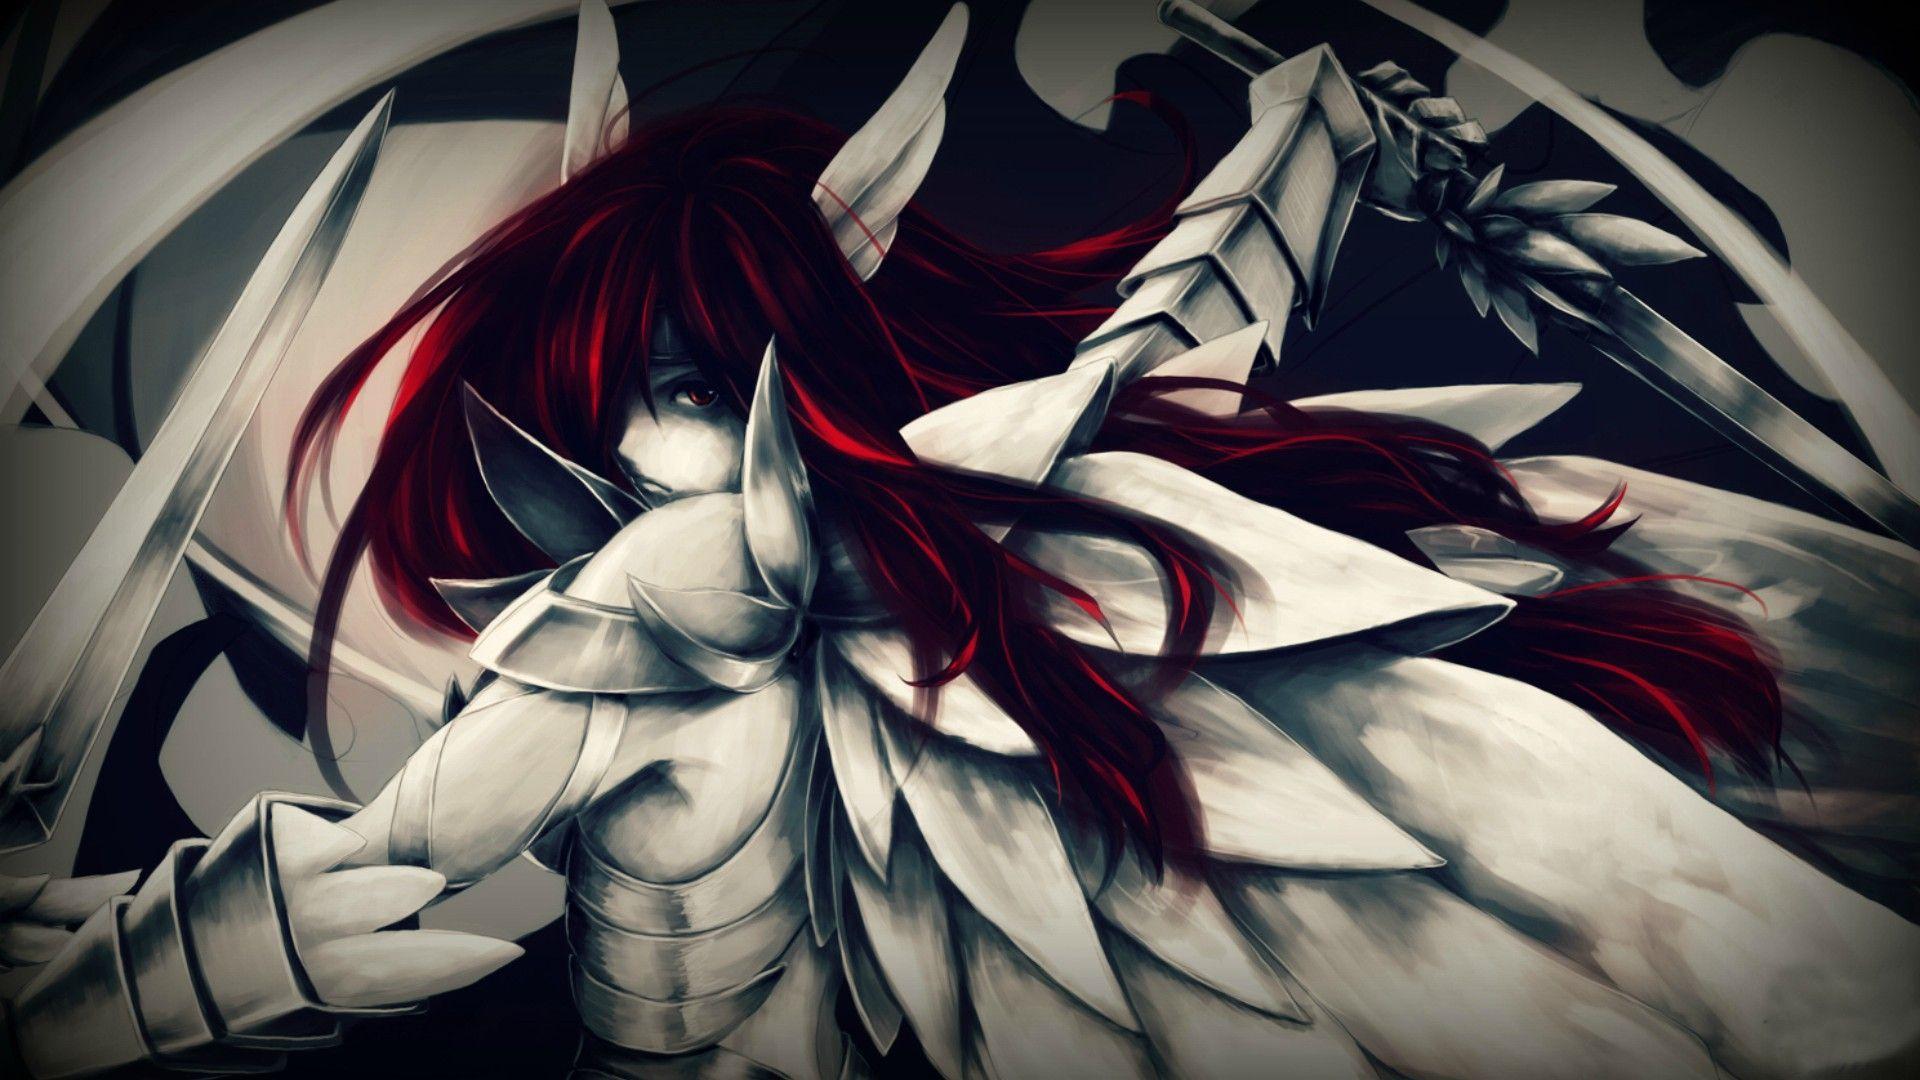 Anime Fairy Tail Erza Scarlet wallpaper 2018 in Anime